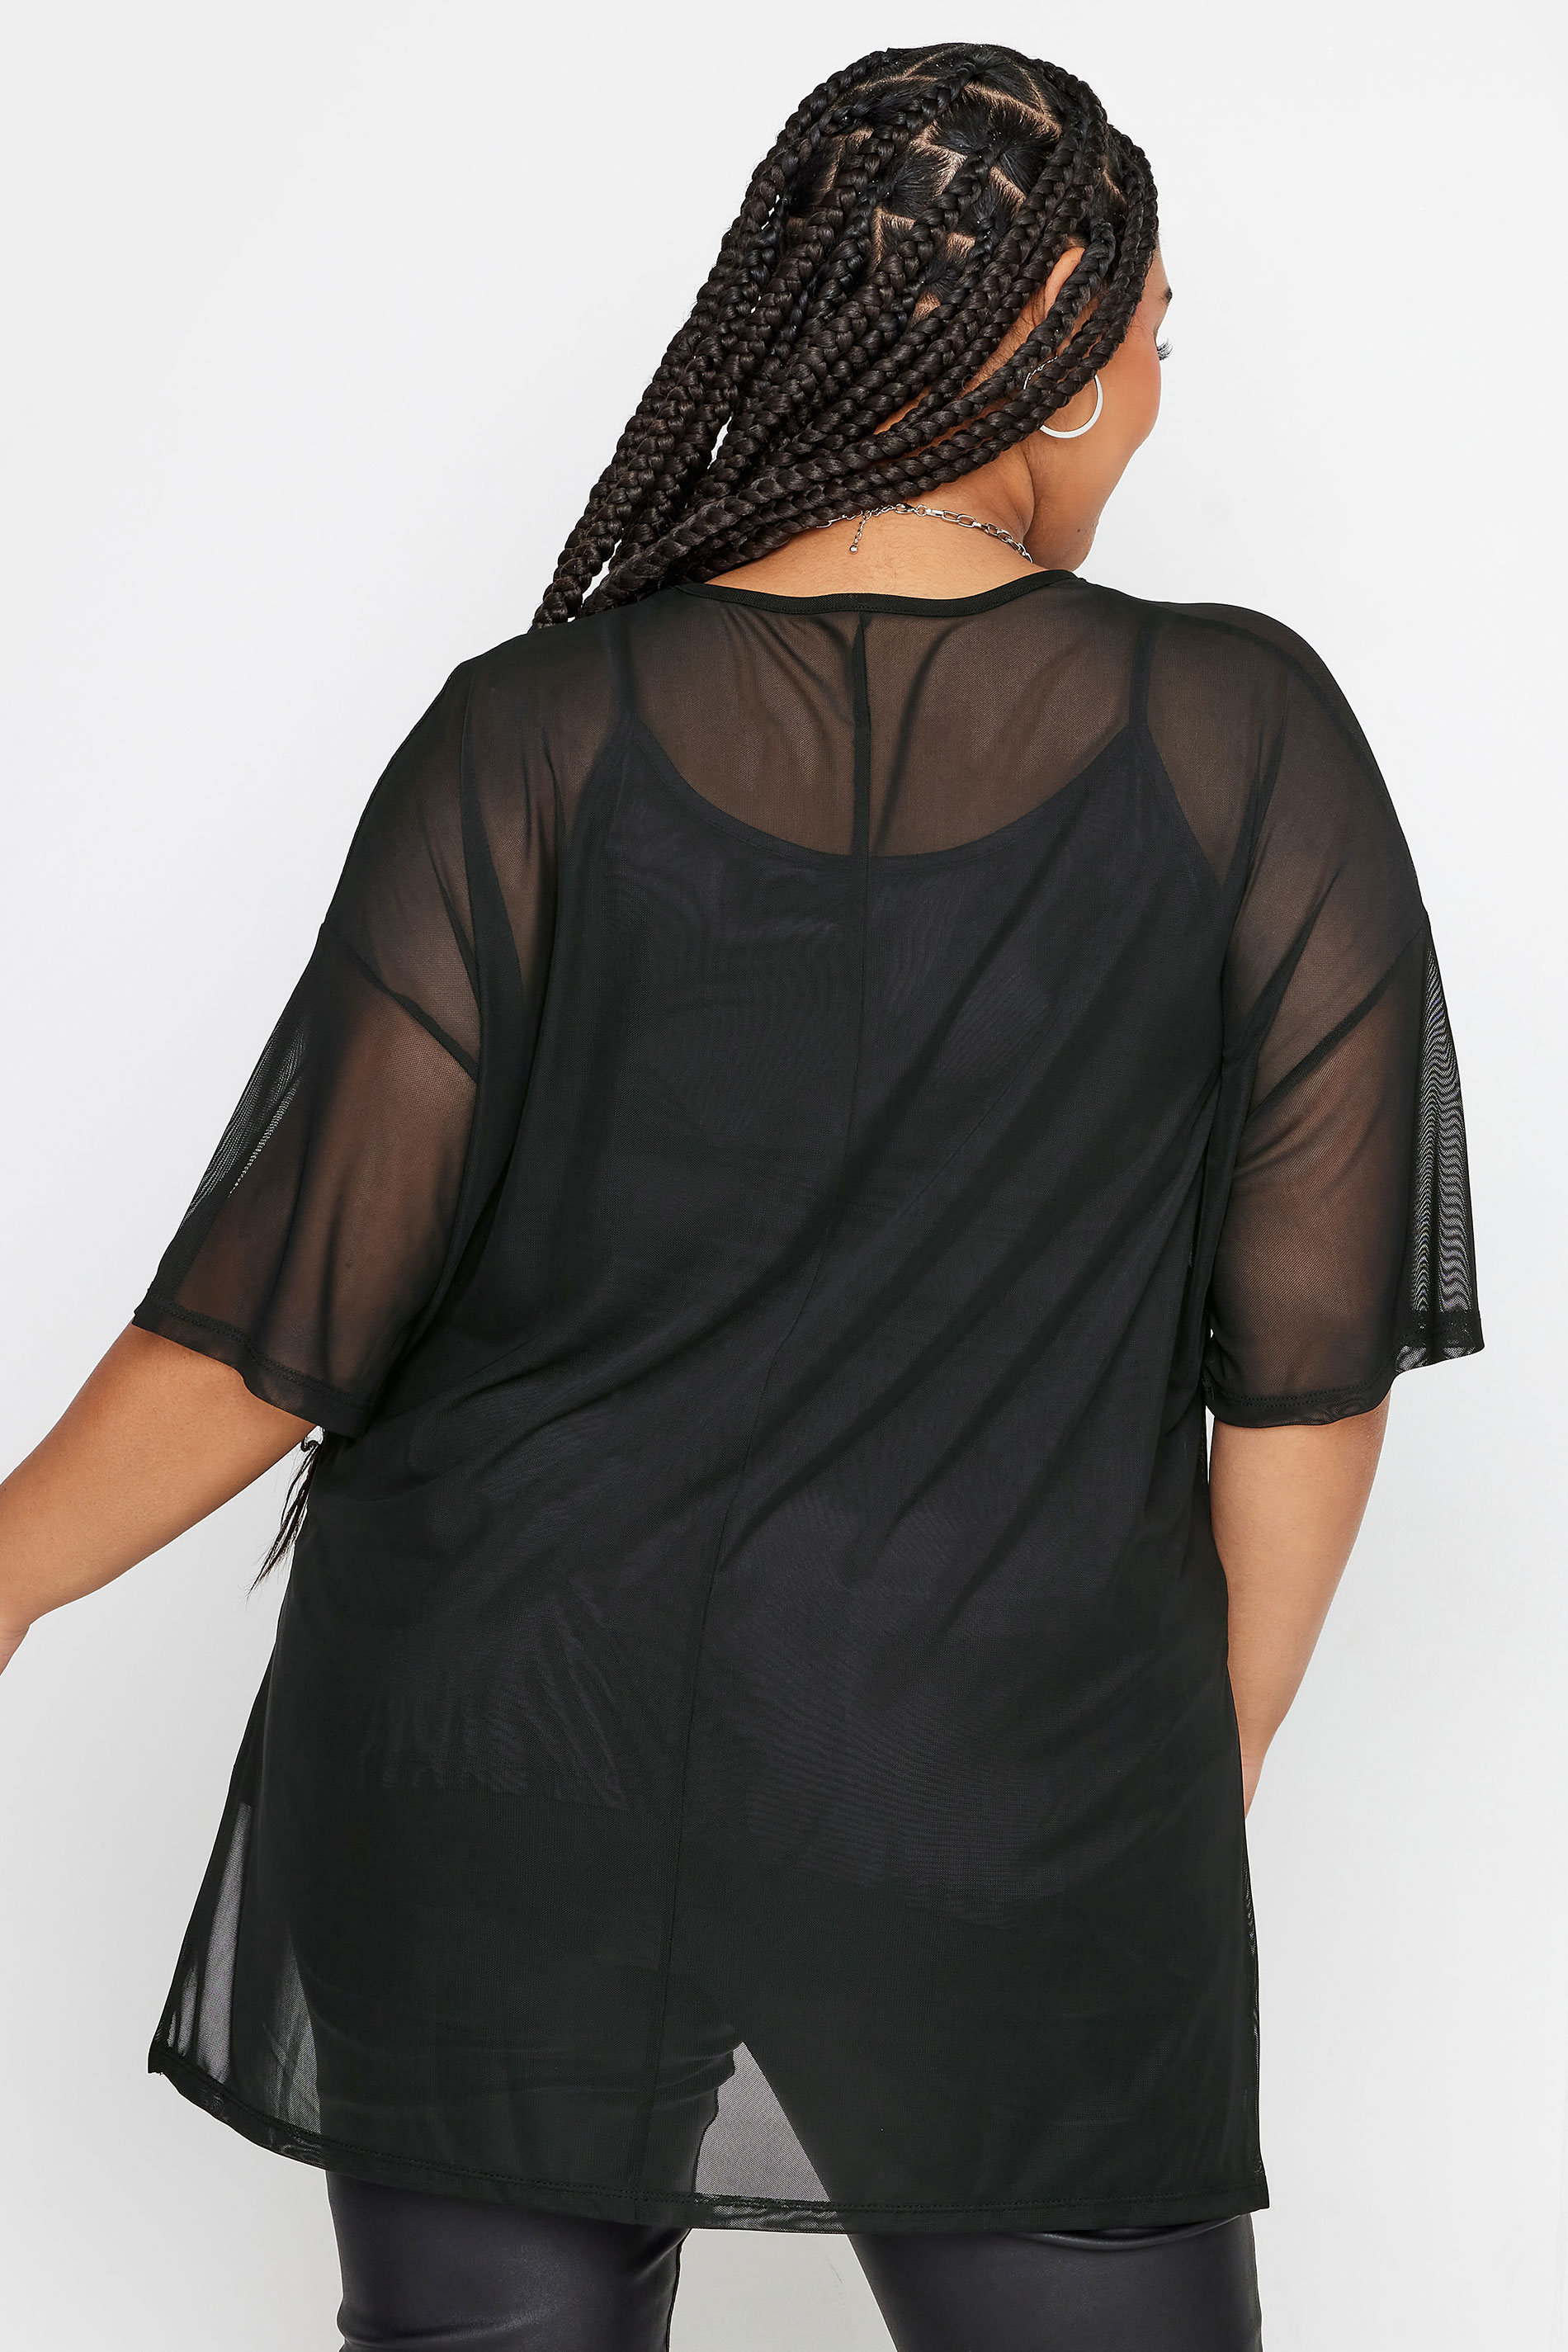 LIMITED COLLECTION Plus Size Black Oversized Mesh Top | Yours Clothing 3